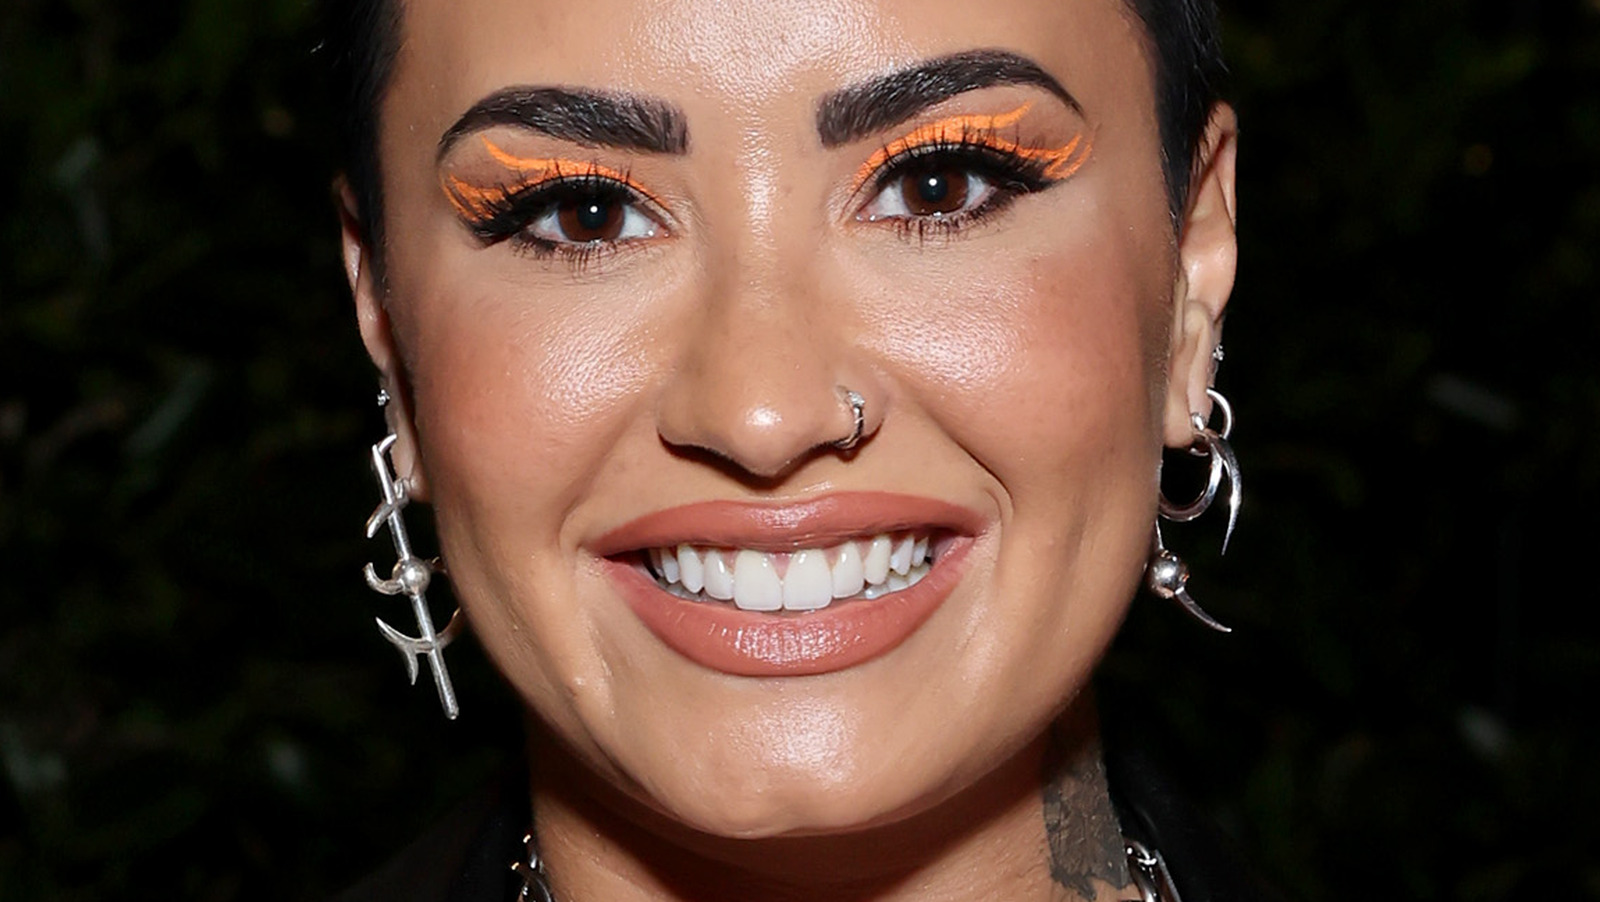 The Real Meaning Behind Demi Lovato's Tattoos